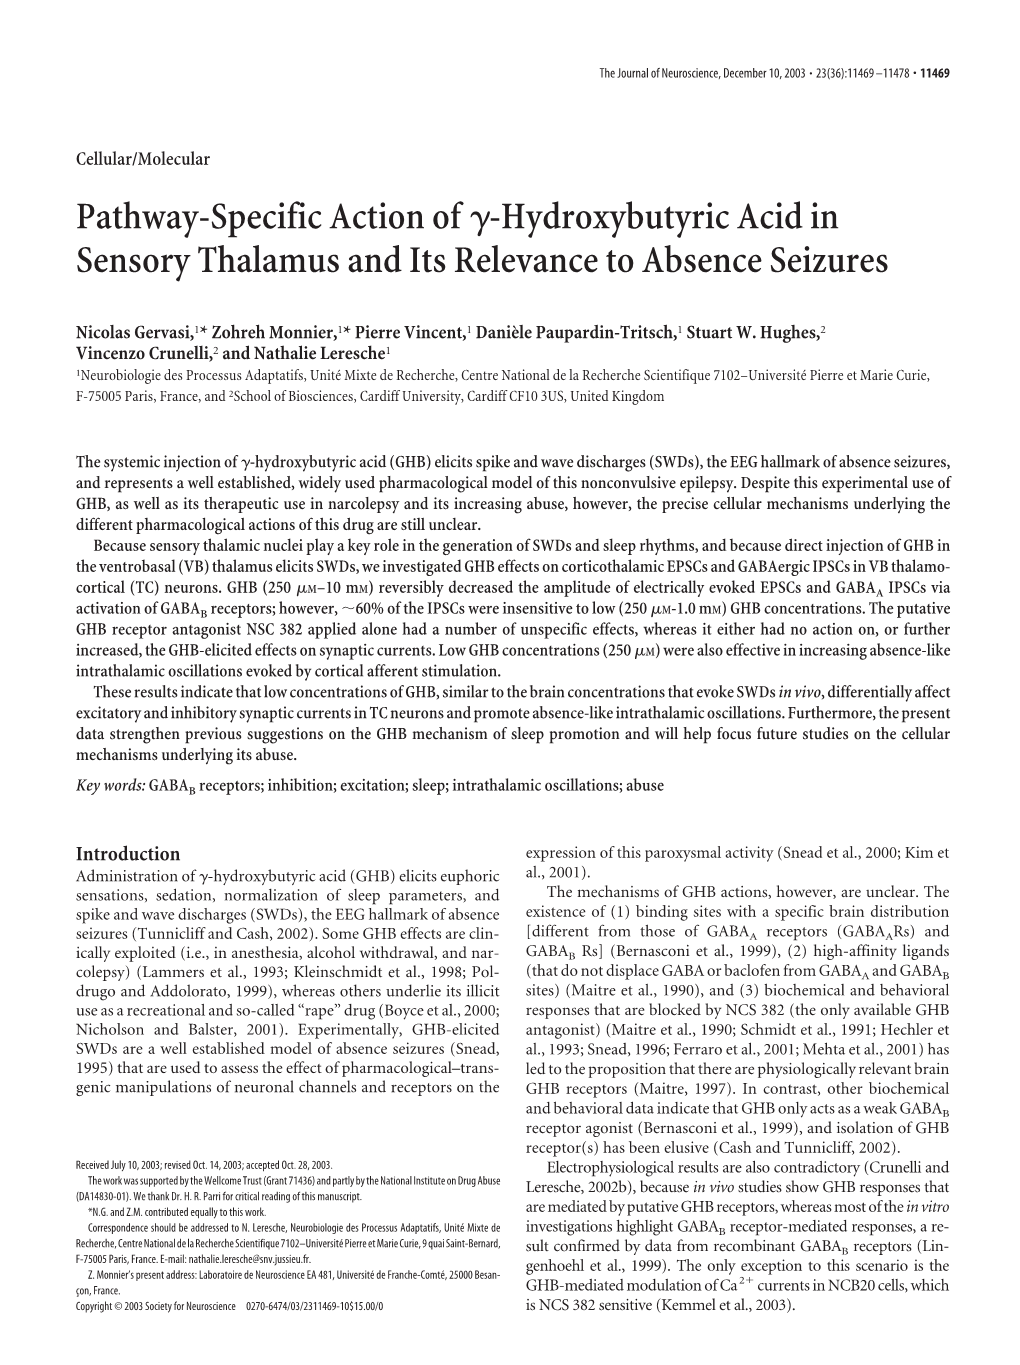 Hydroxybutyric Acid in Sensory Thalamus and Its Relevance to Absence Seizures